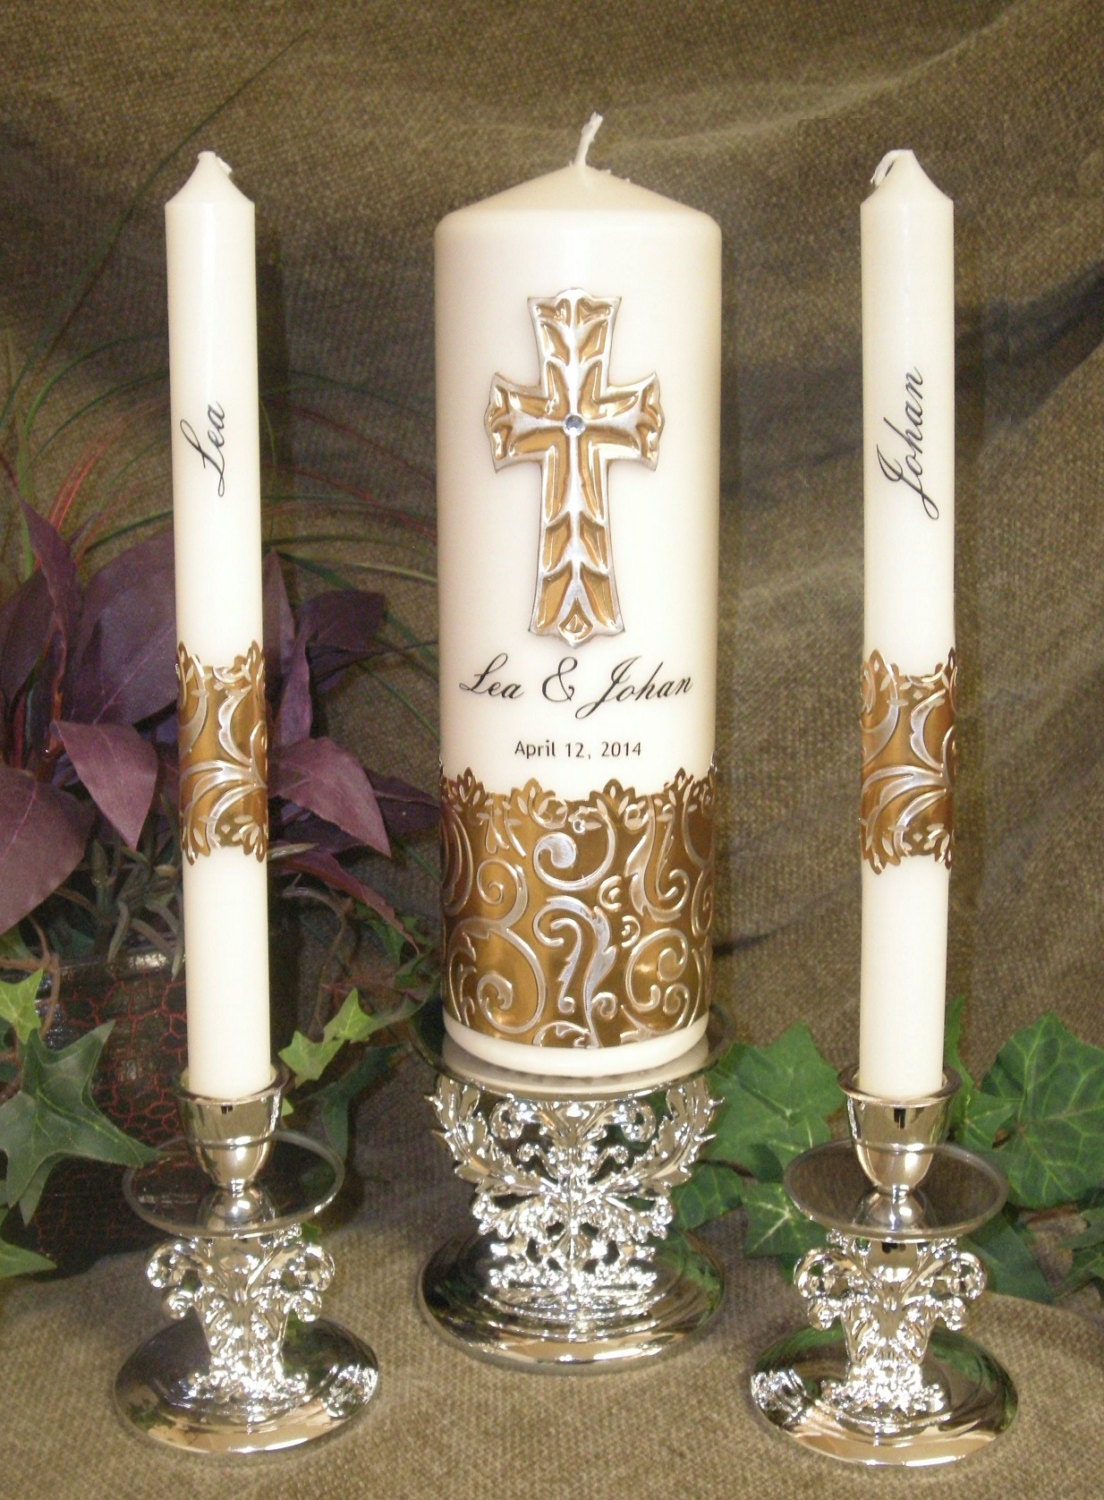 Personalized Unity candle set with metal embossing